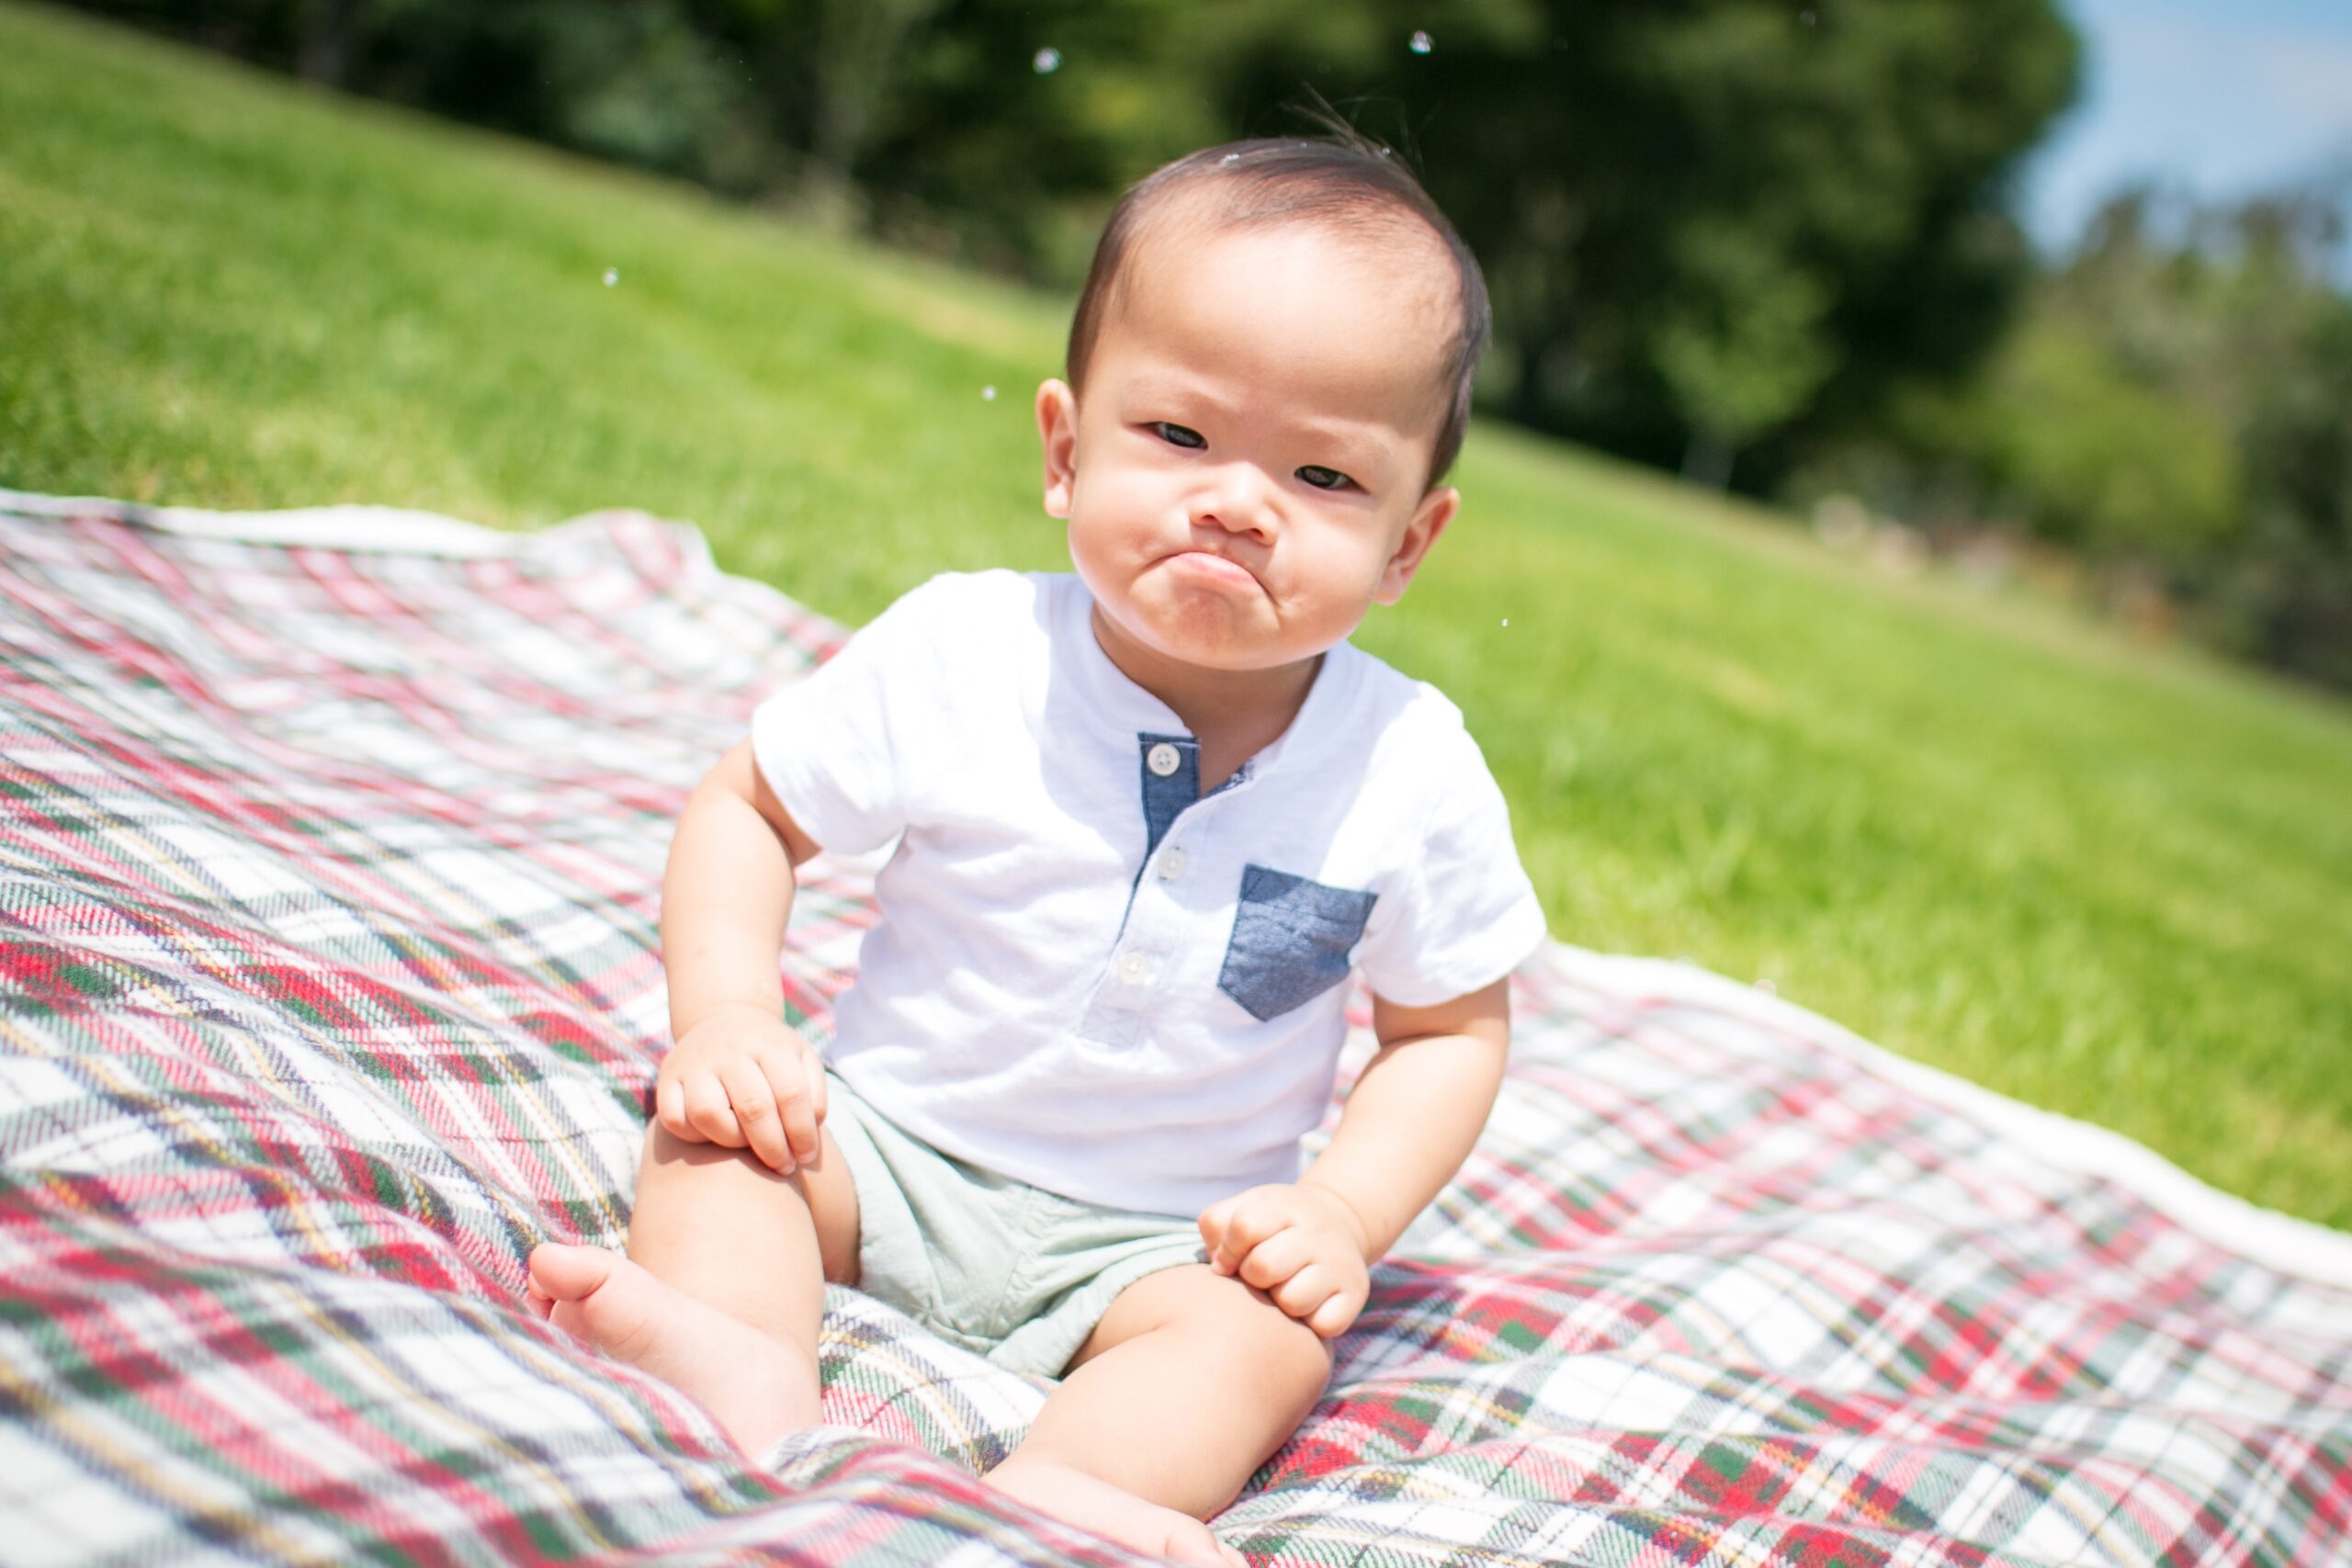 frowning baby sitting on a picnic blanket